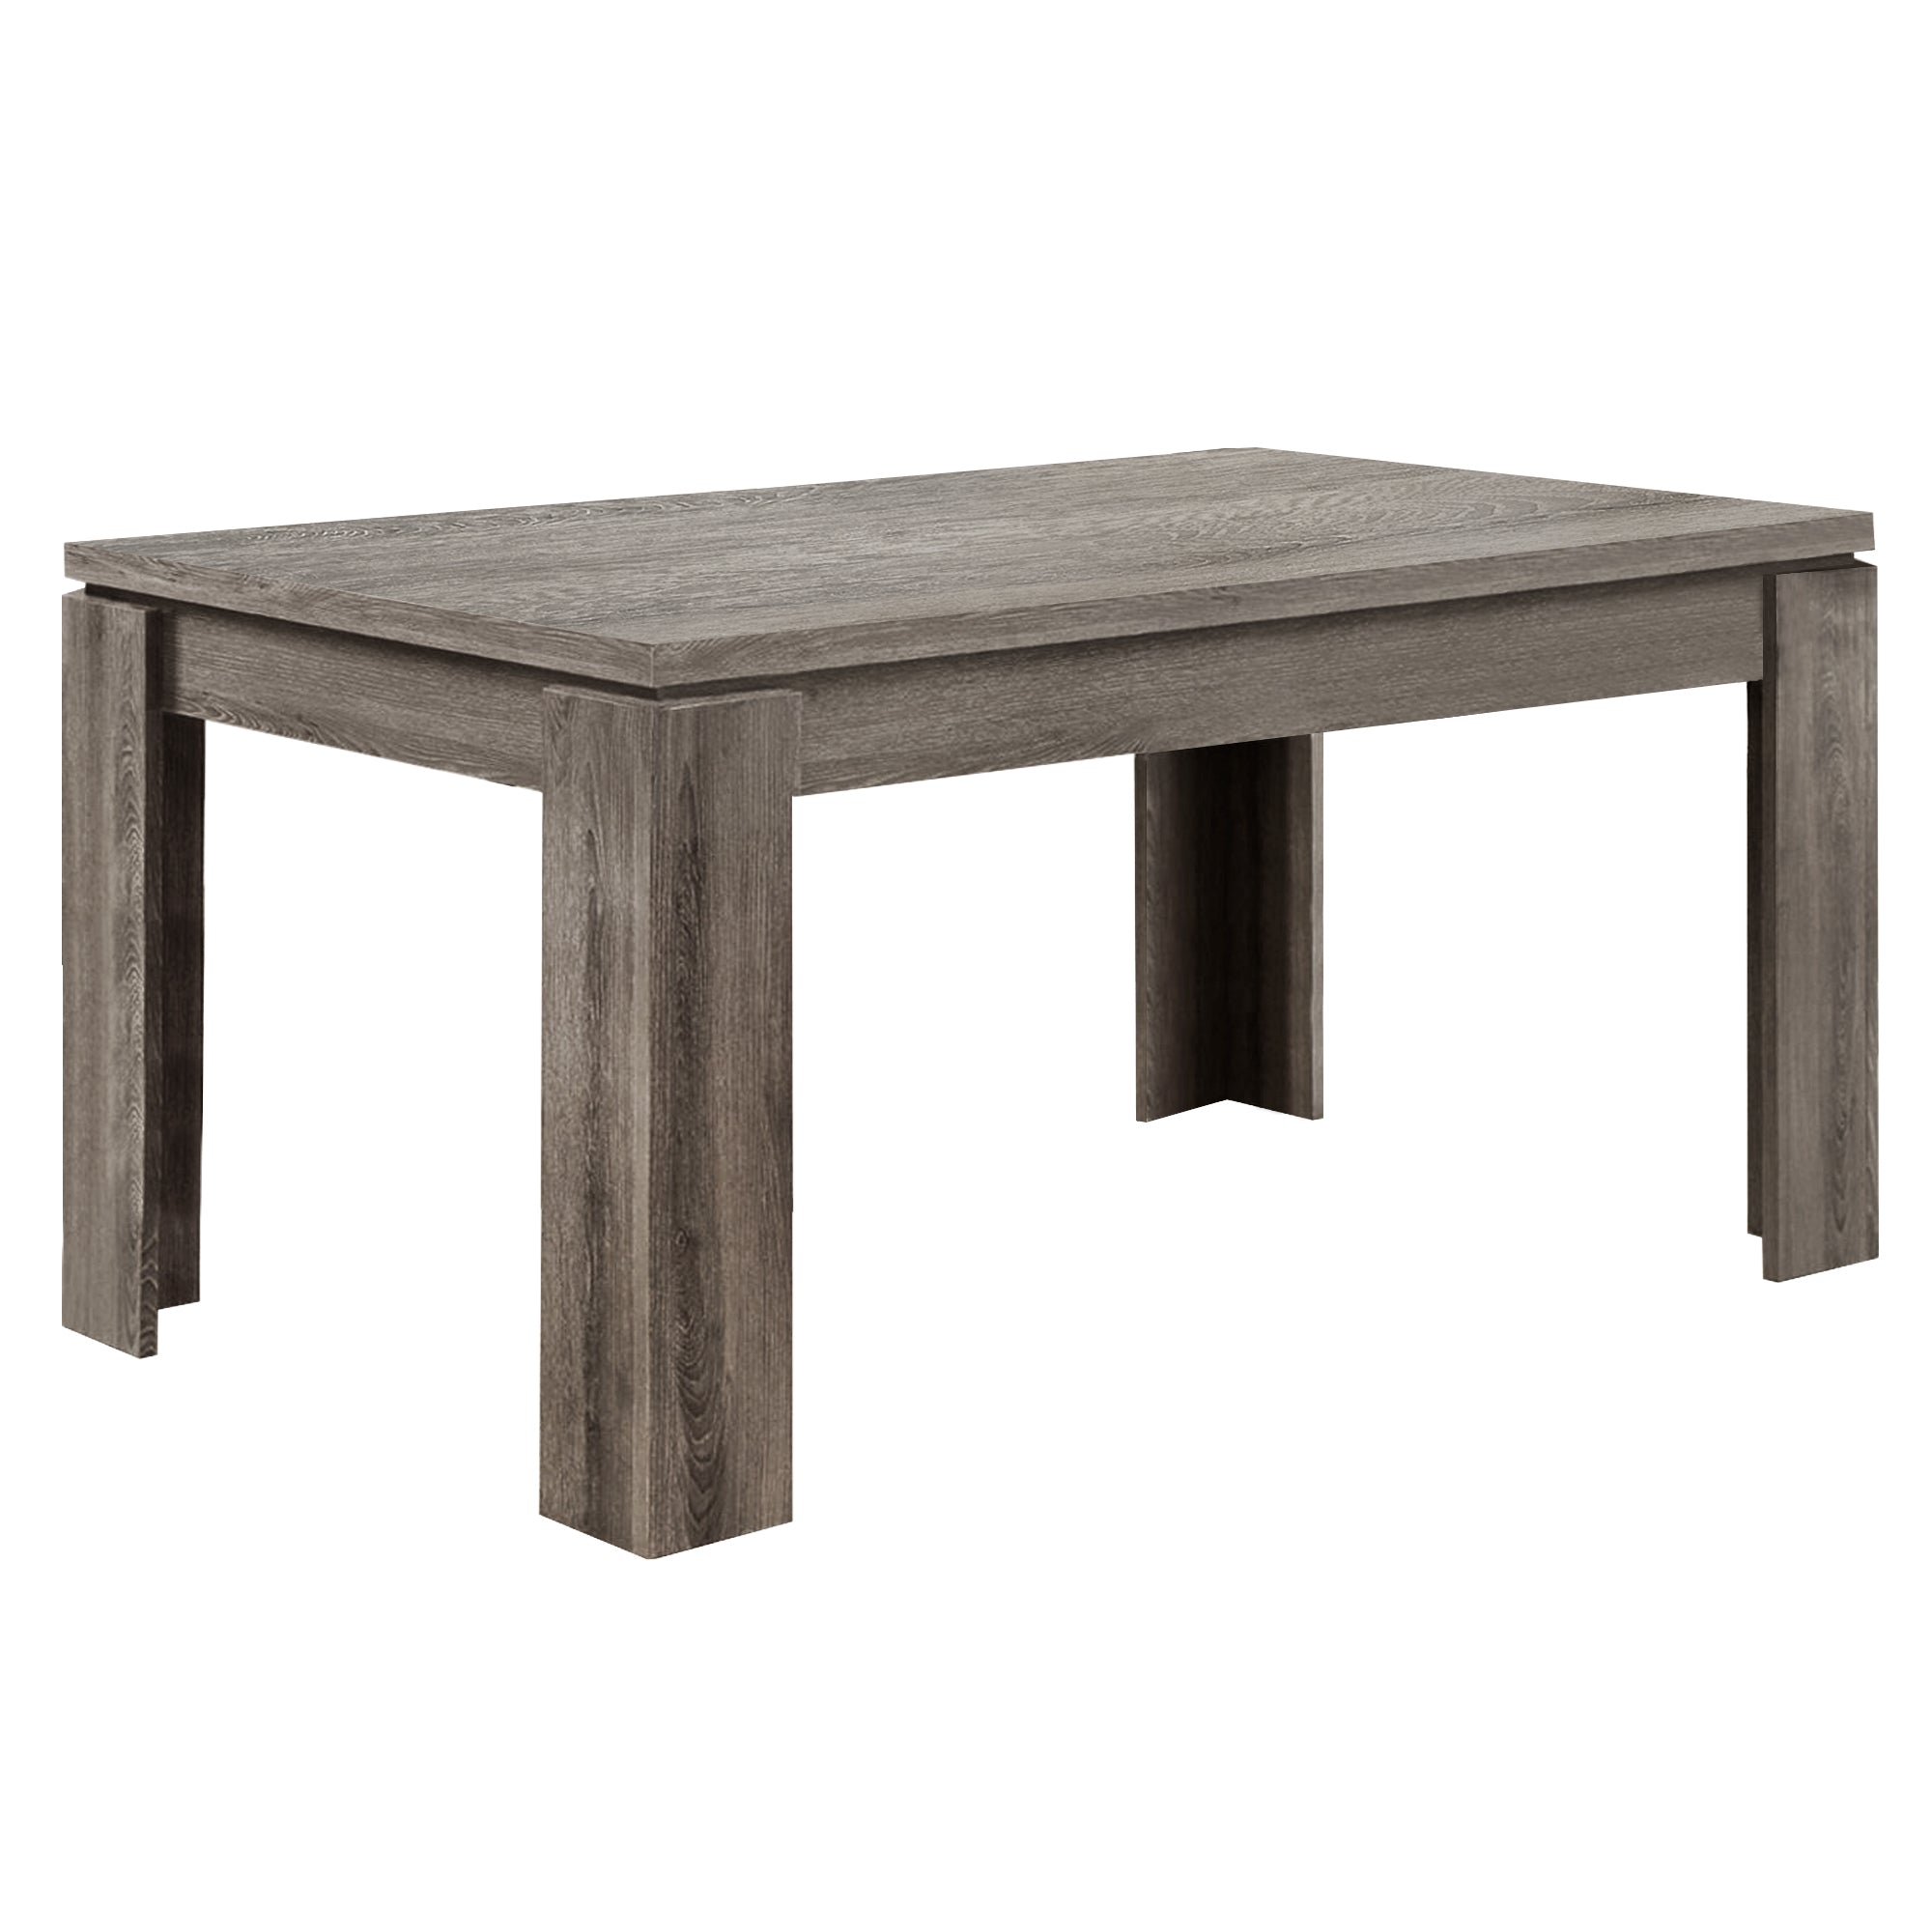 DINING TABLE - 36"X 60" / DARK TAUPE